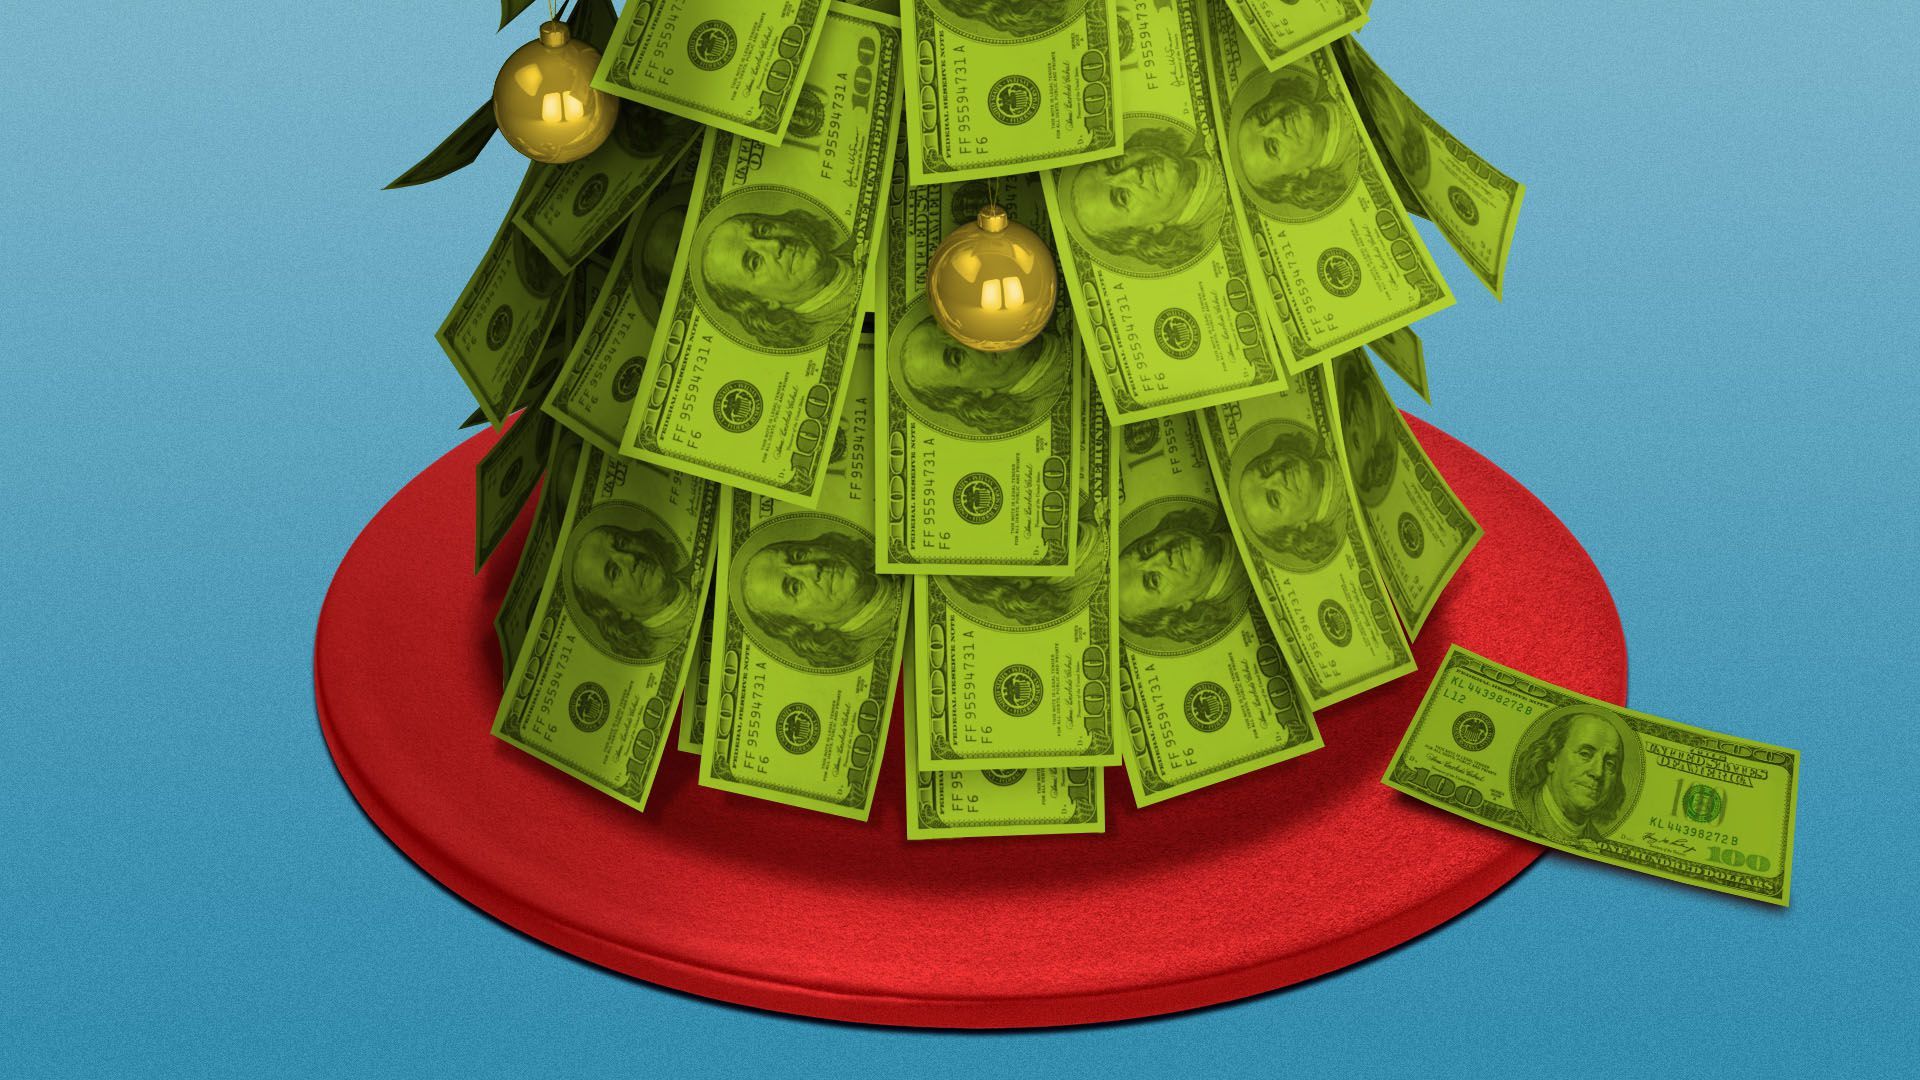 Illustration of the bottom of a Christmas tree made out of cash without gifts